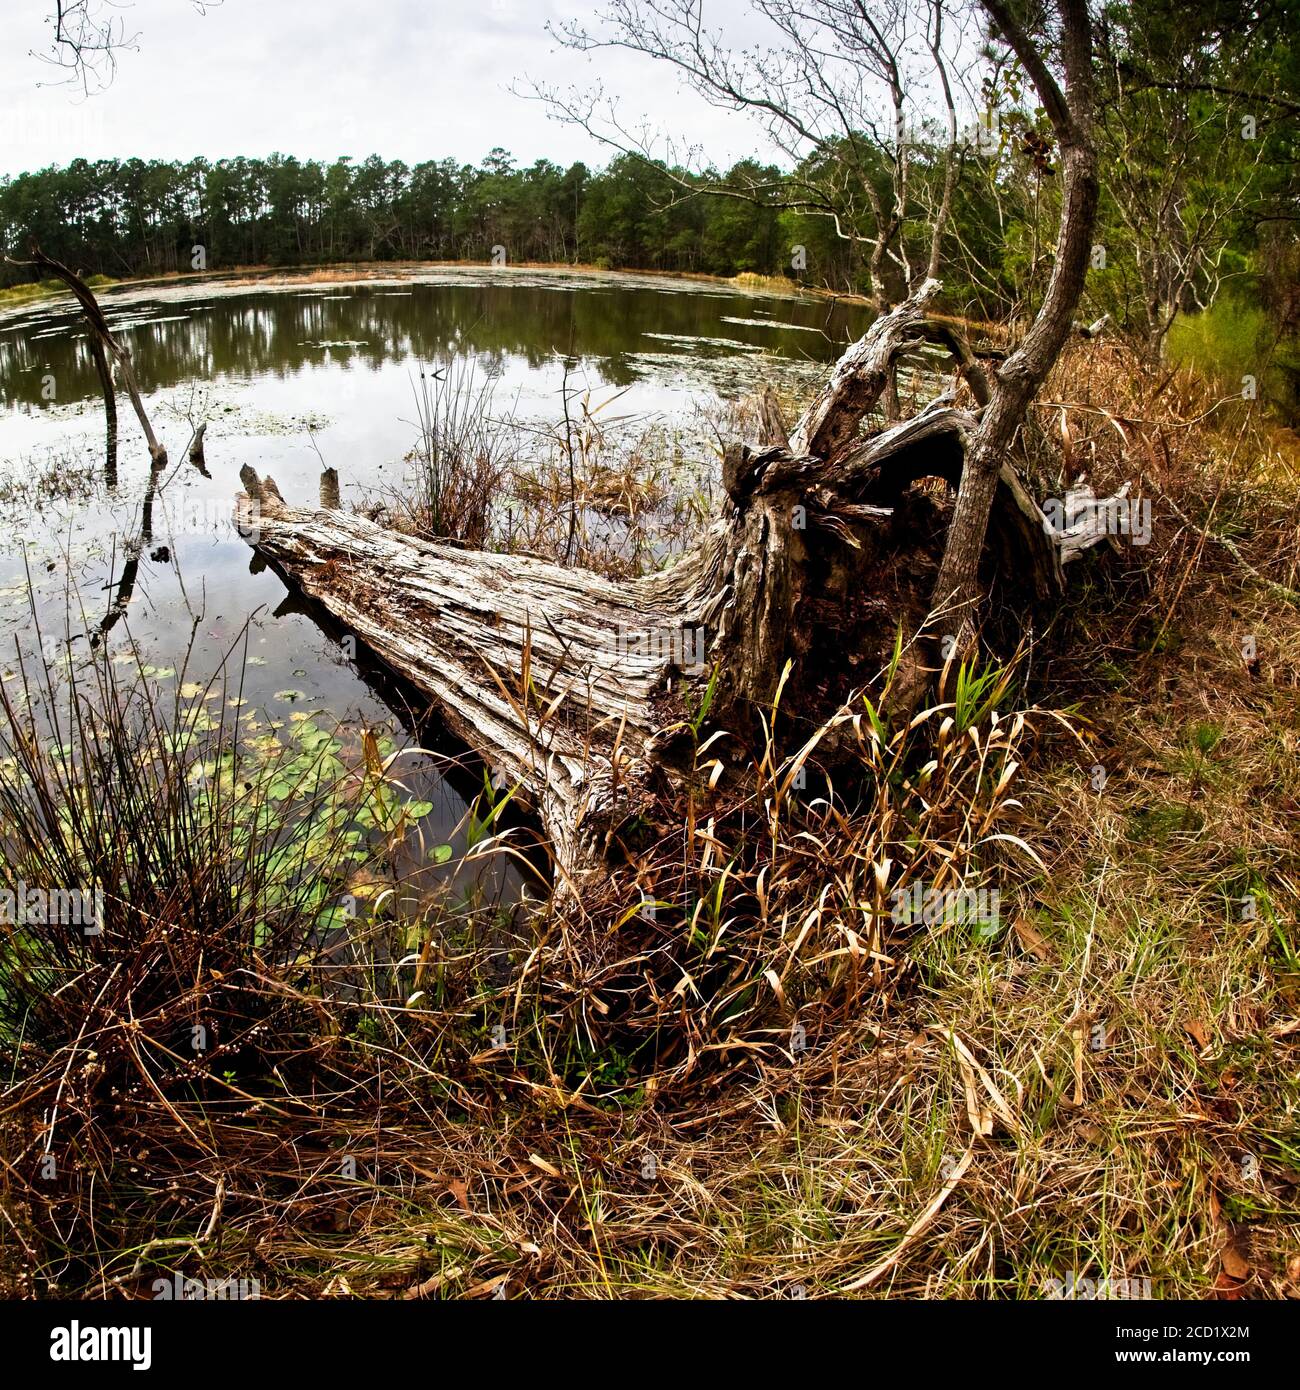 The Woodlands TX USA - 01-09-2020 - Dead Tree in See Stockfoto